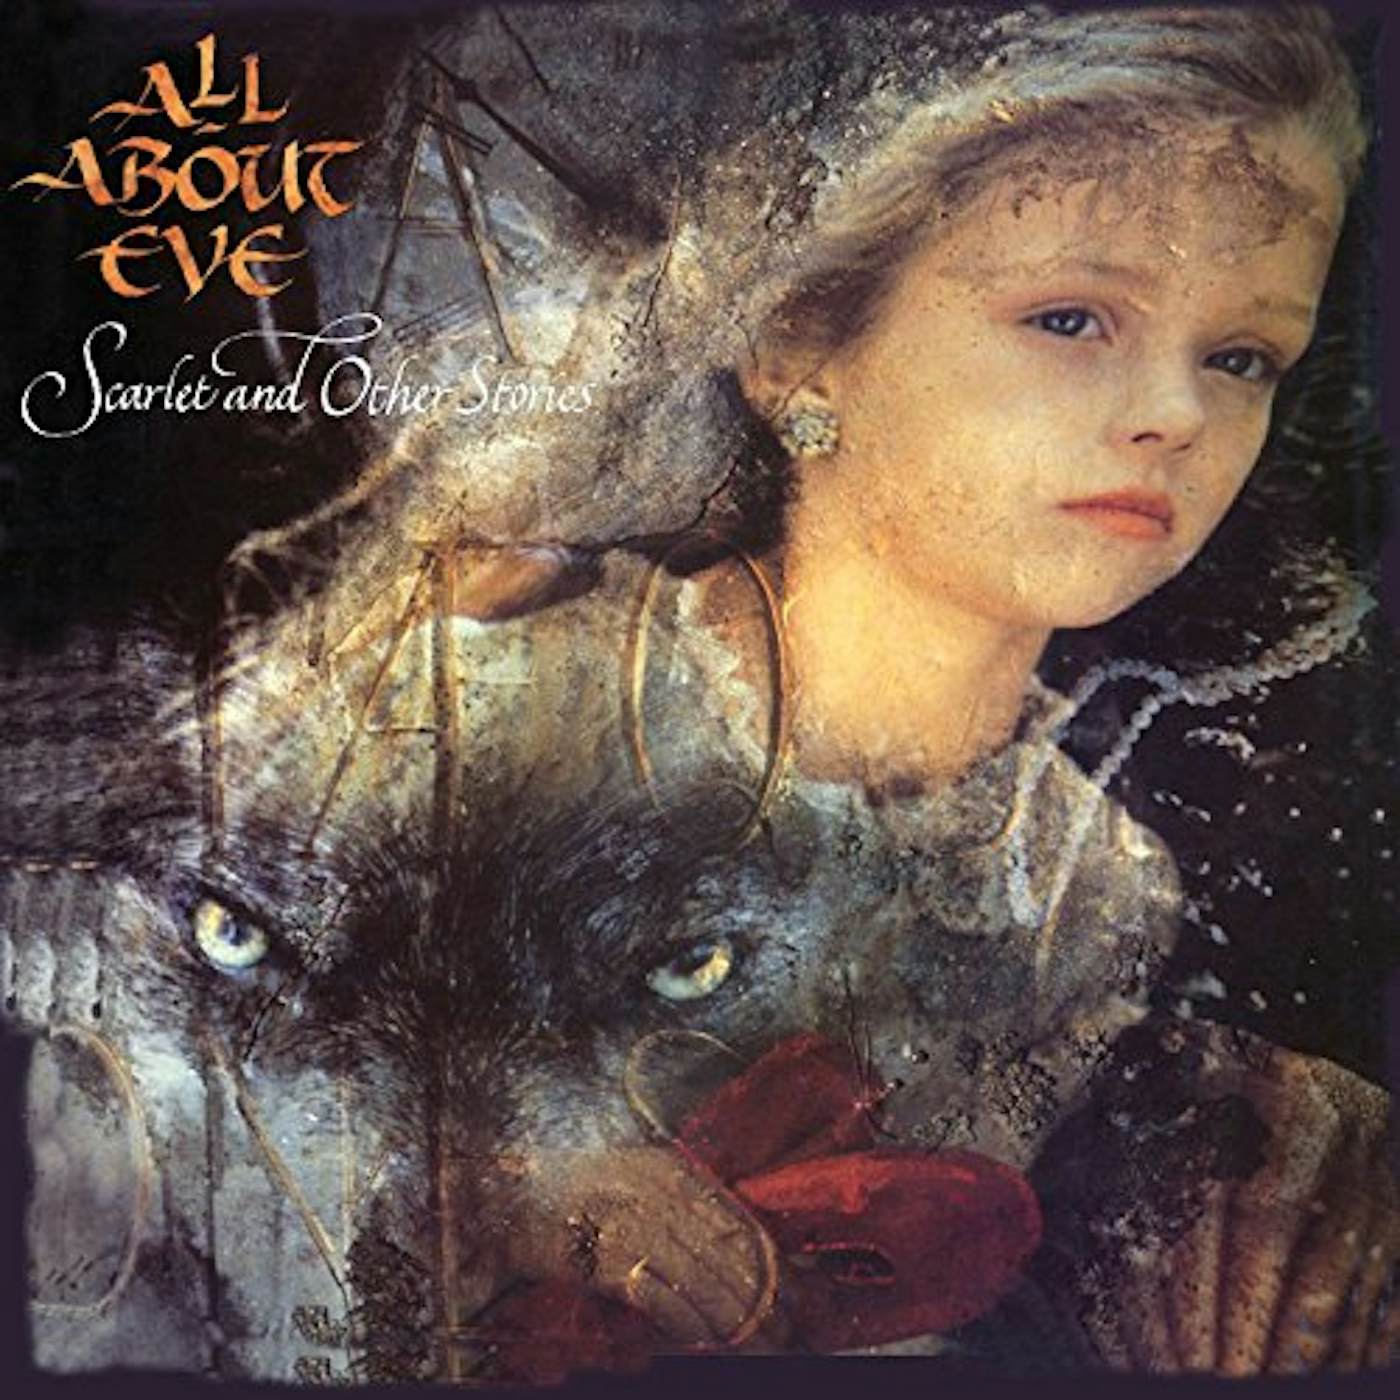 All About Eve SCARLETS & OTHER STORIES CD